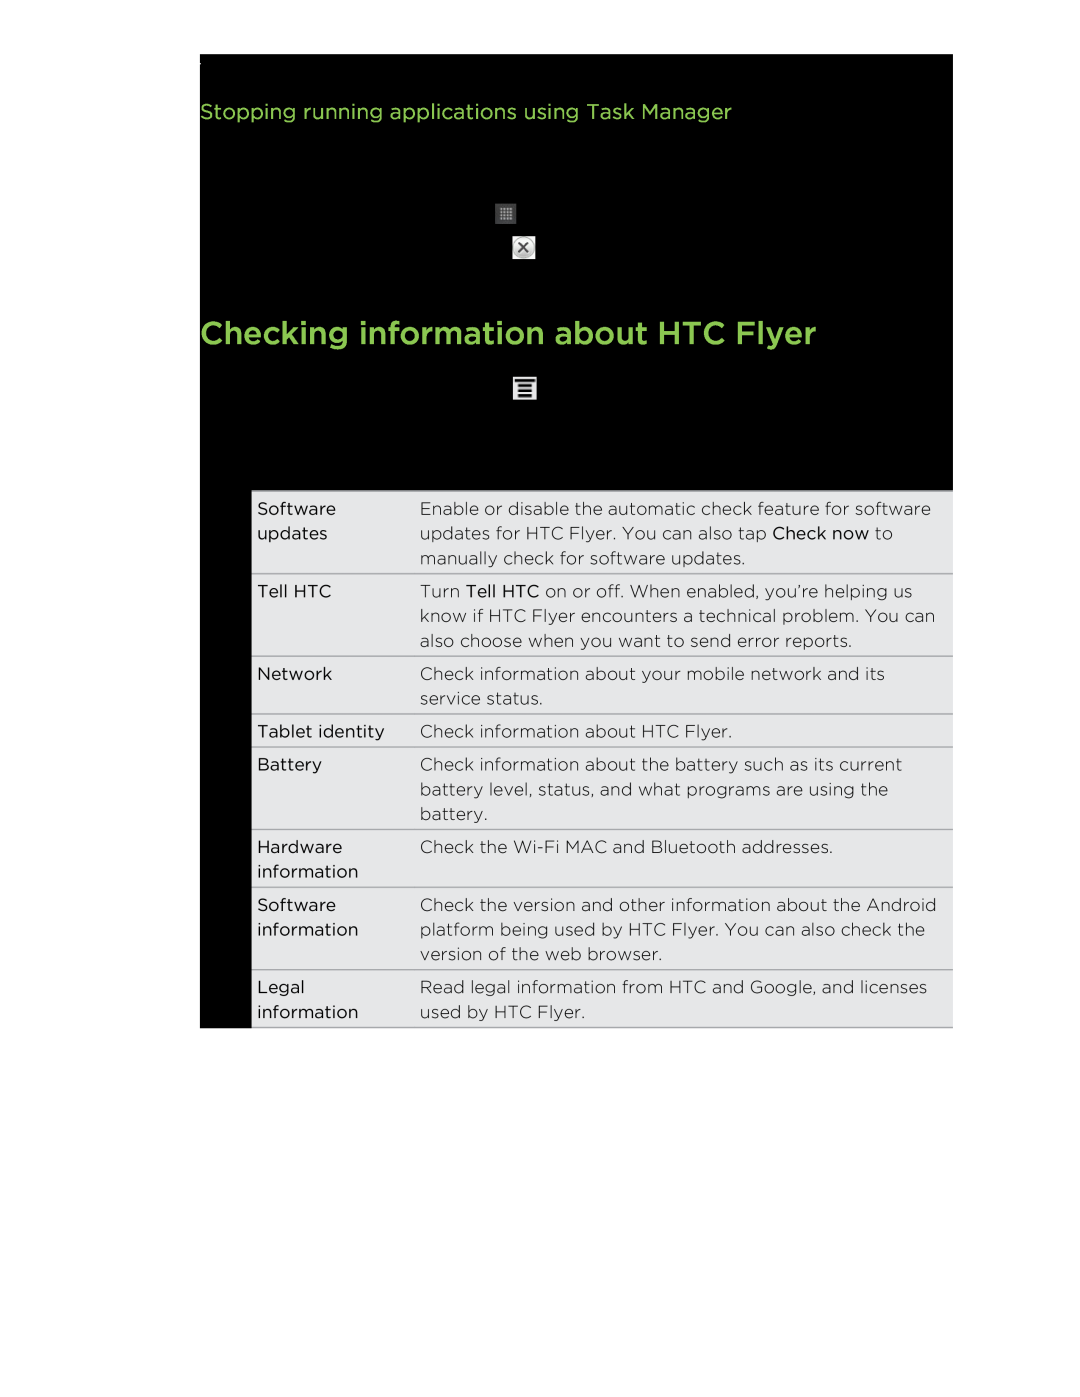 HTC HTCFlyerP512 manual Checking information about HTC Flyer, Stopping running applications using Task Manager 